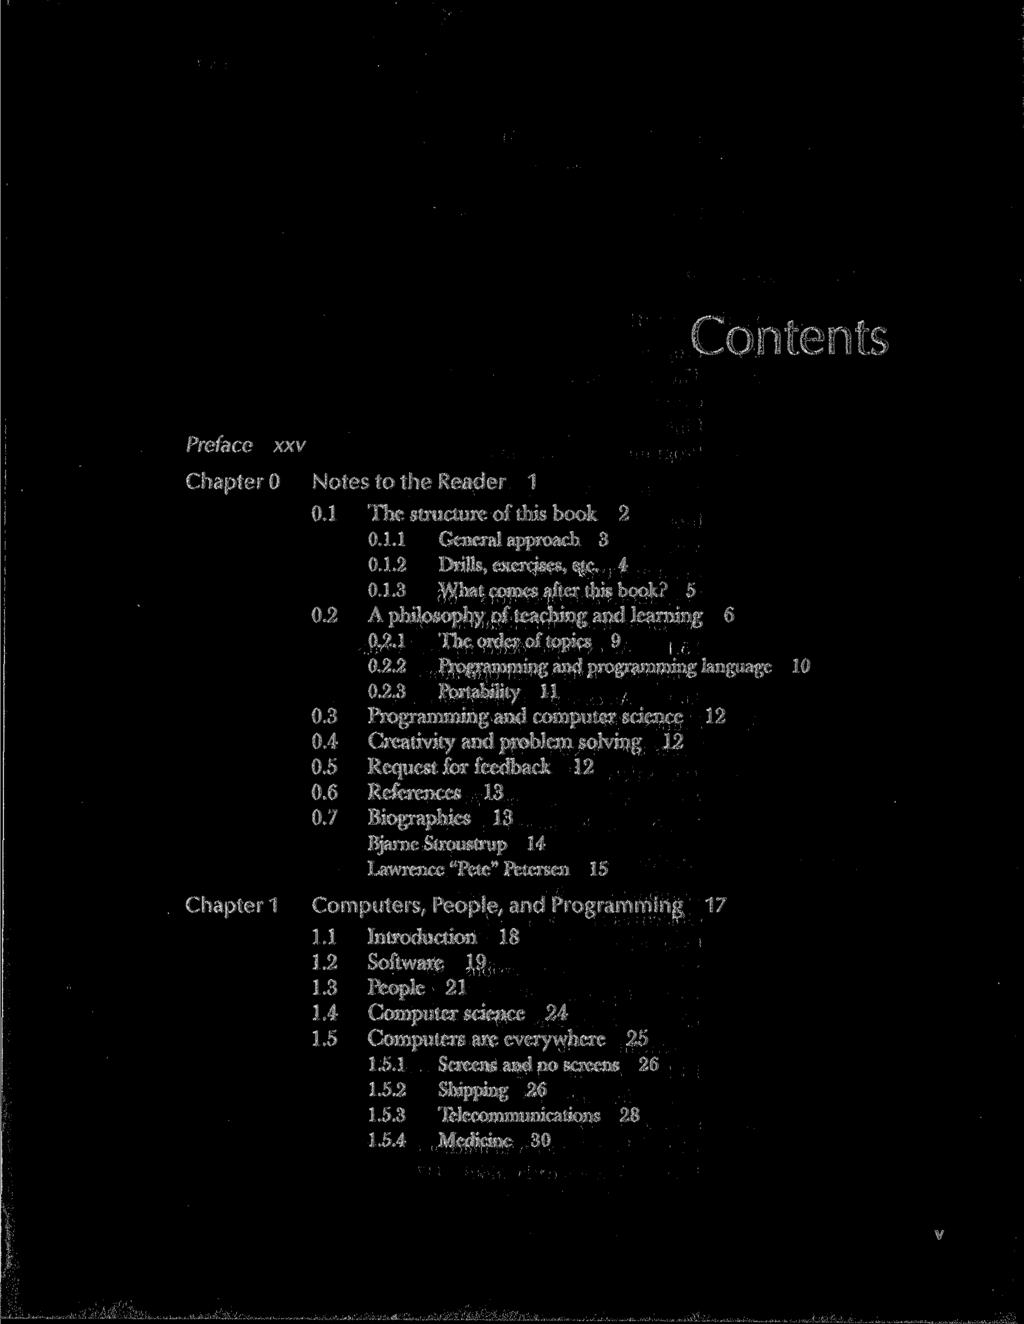 Contents Preface xxv Chapter 0 Notes to the Reader 1 0.1 The structure of this book 2 0.1.1 General approach 3 0.1.2 Drills, exercises, etc. 4 0.1.3 What comes after this book? 5 0.